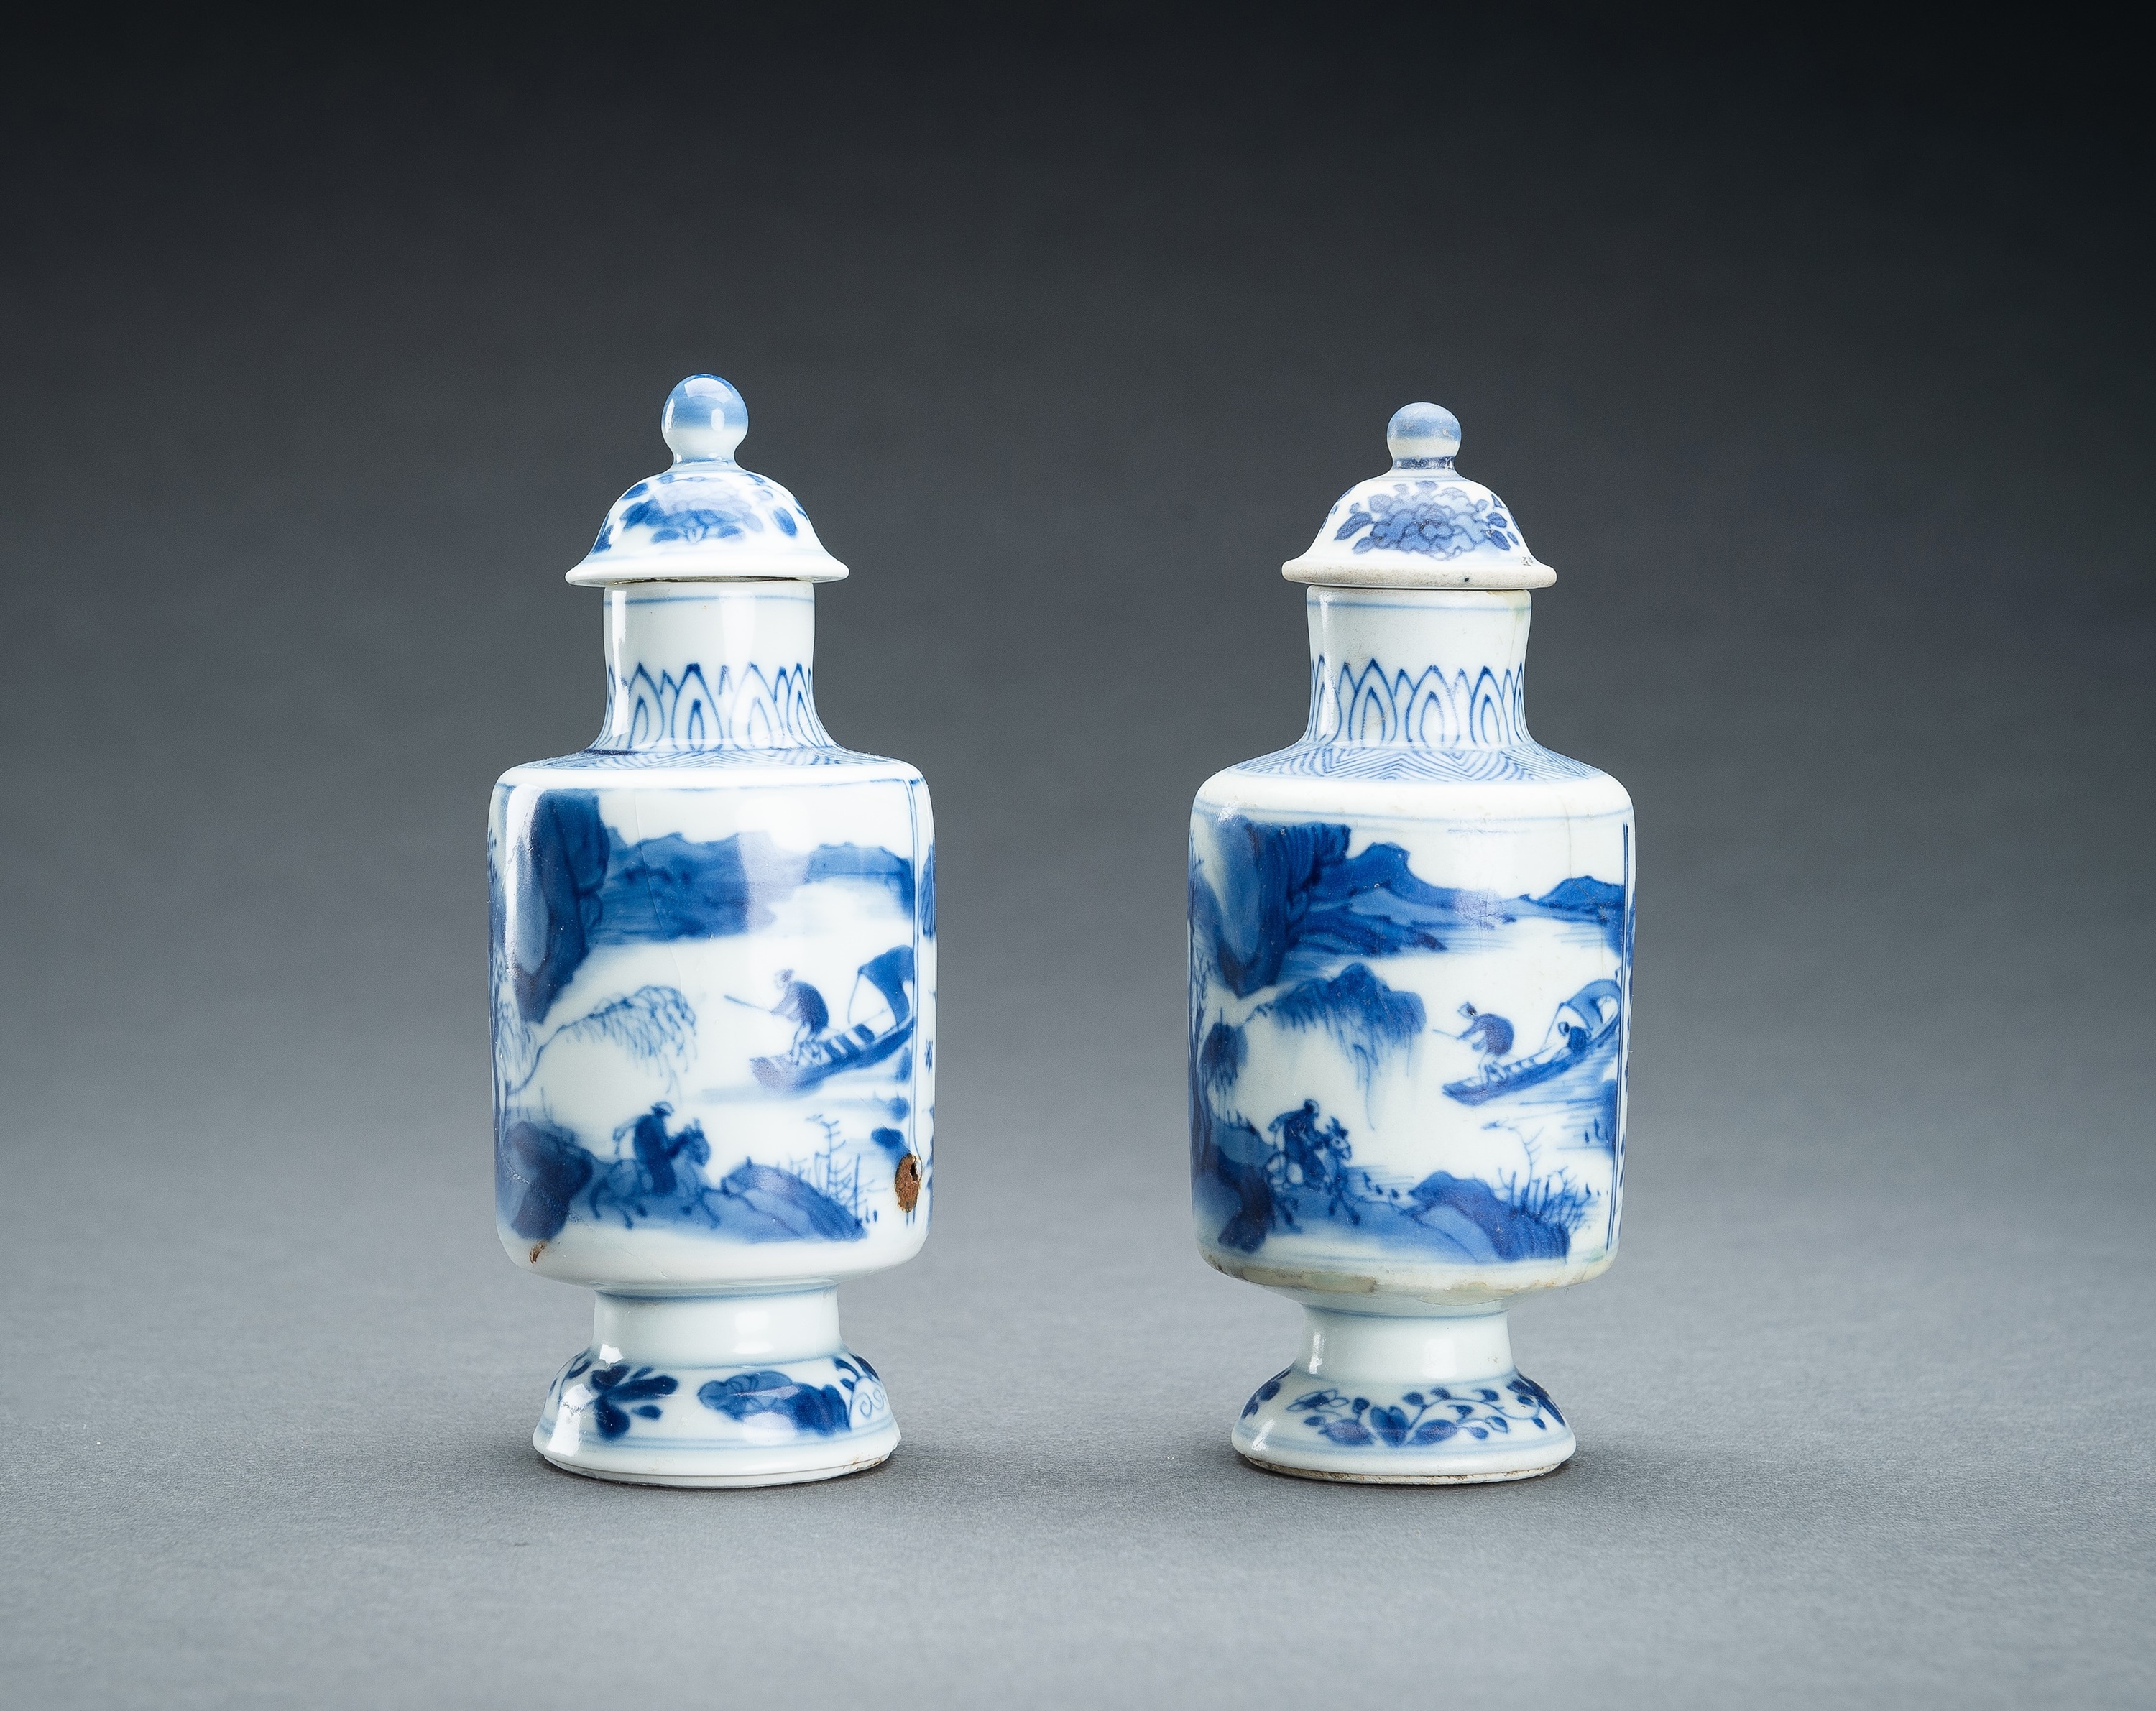 TWO BLUE AND WHITE PORCELAIN VASES WITH COVERS, 17th CENTURY